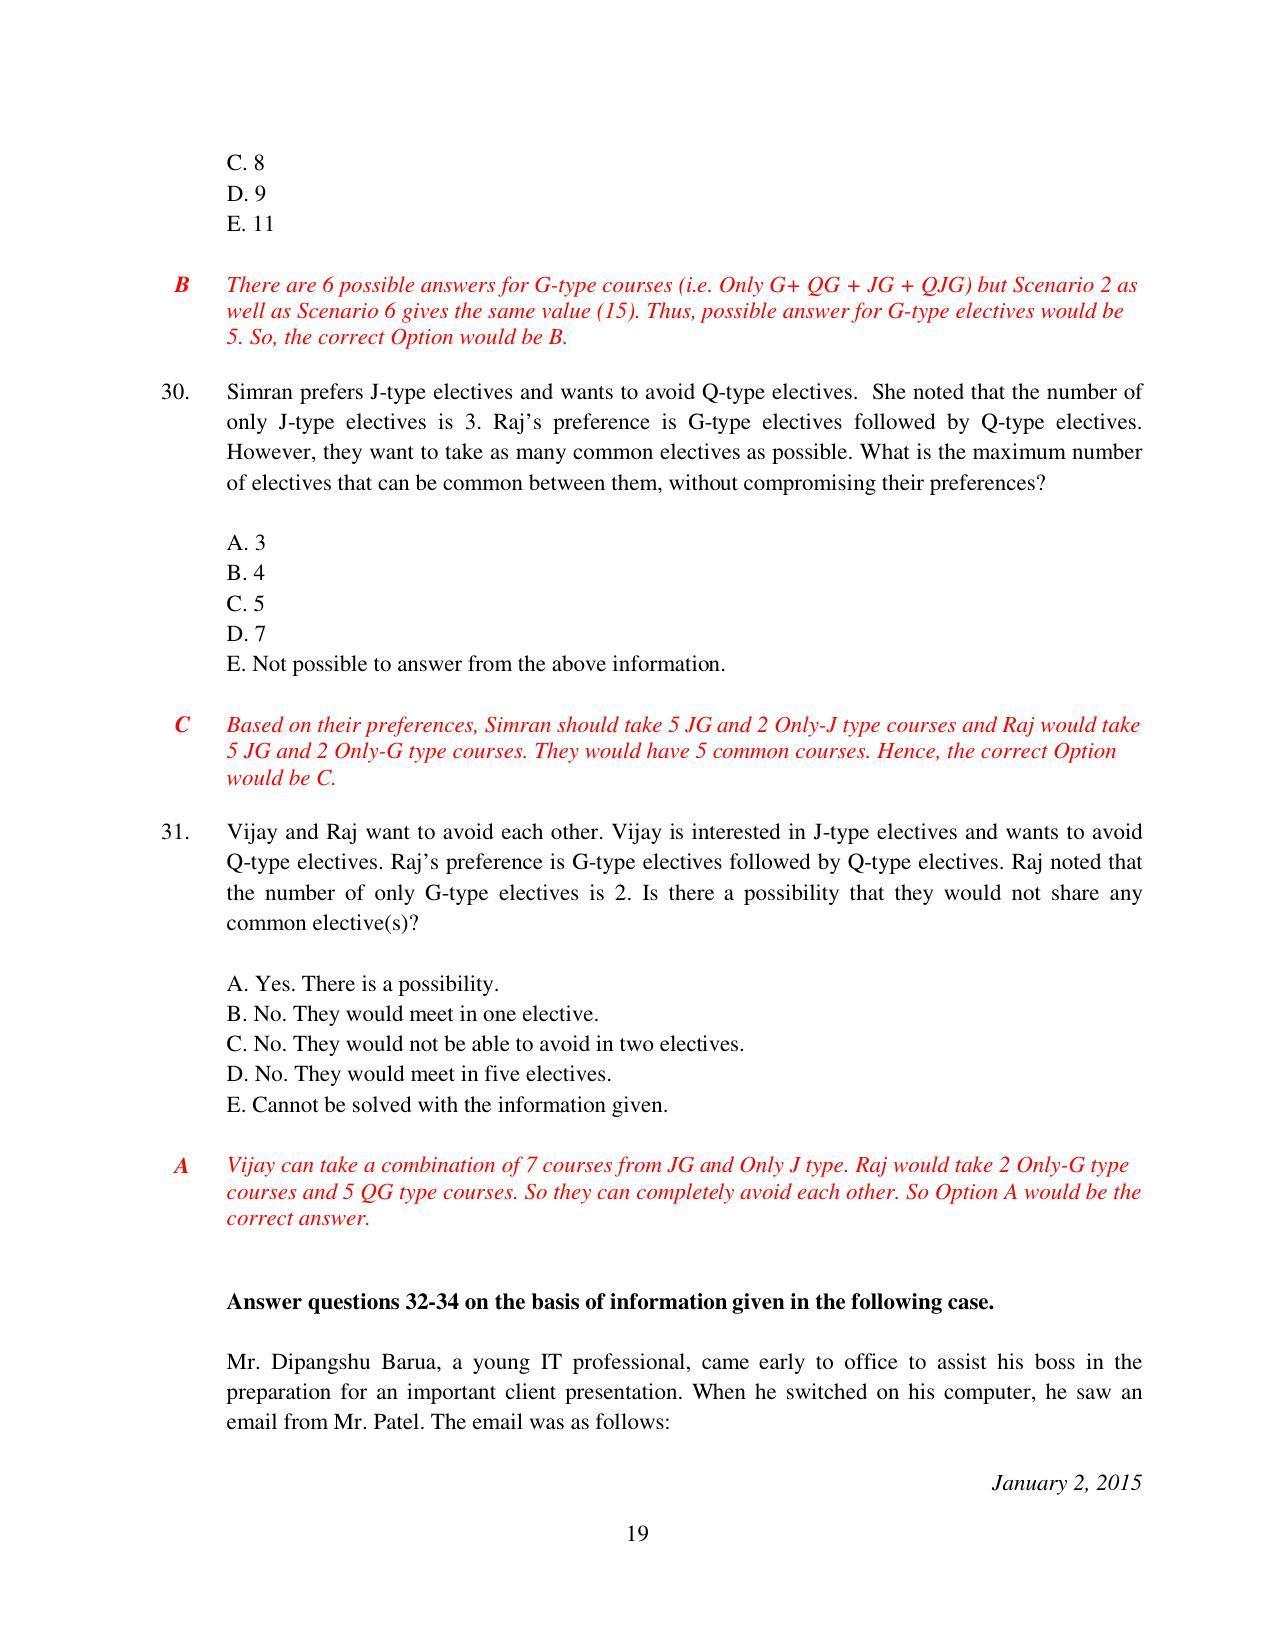 XAT 2015 Set D Question Papers - Page 20